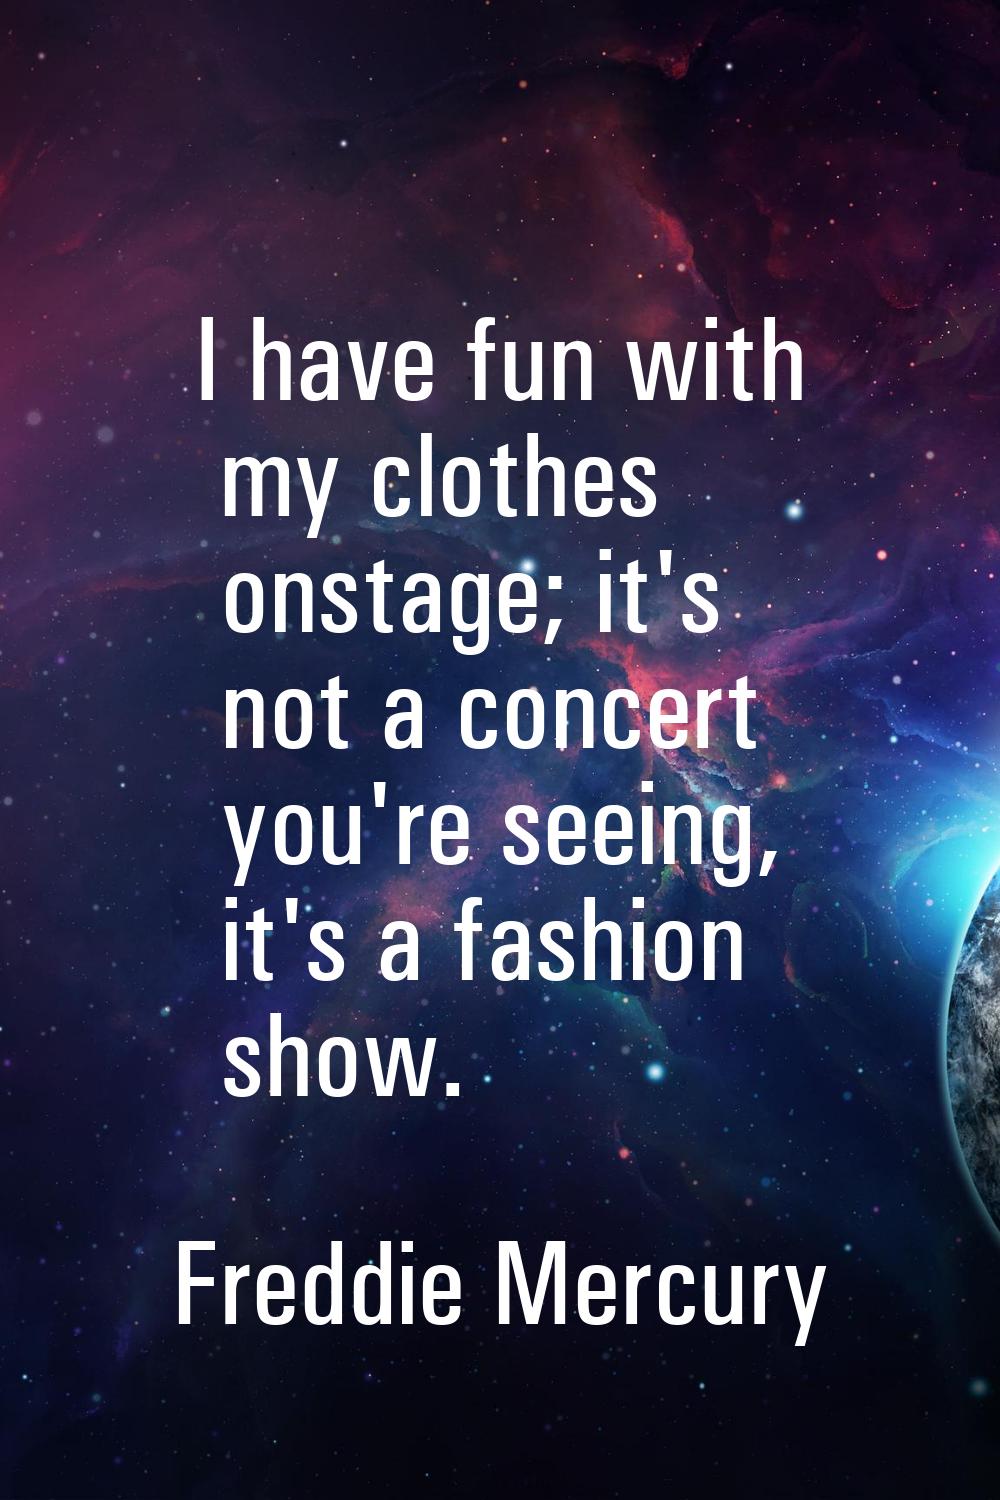 I have fun with my clothes onstage; it's not a concert you're seeing, it's a fashion show.